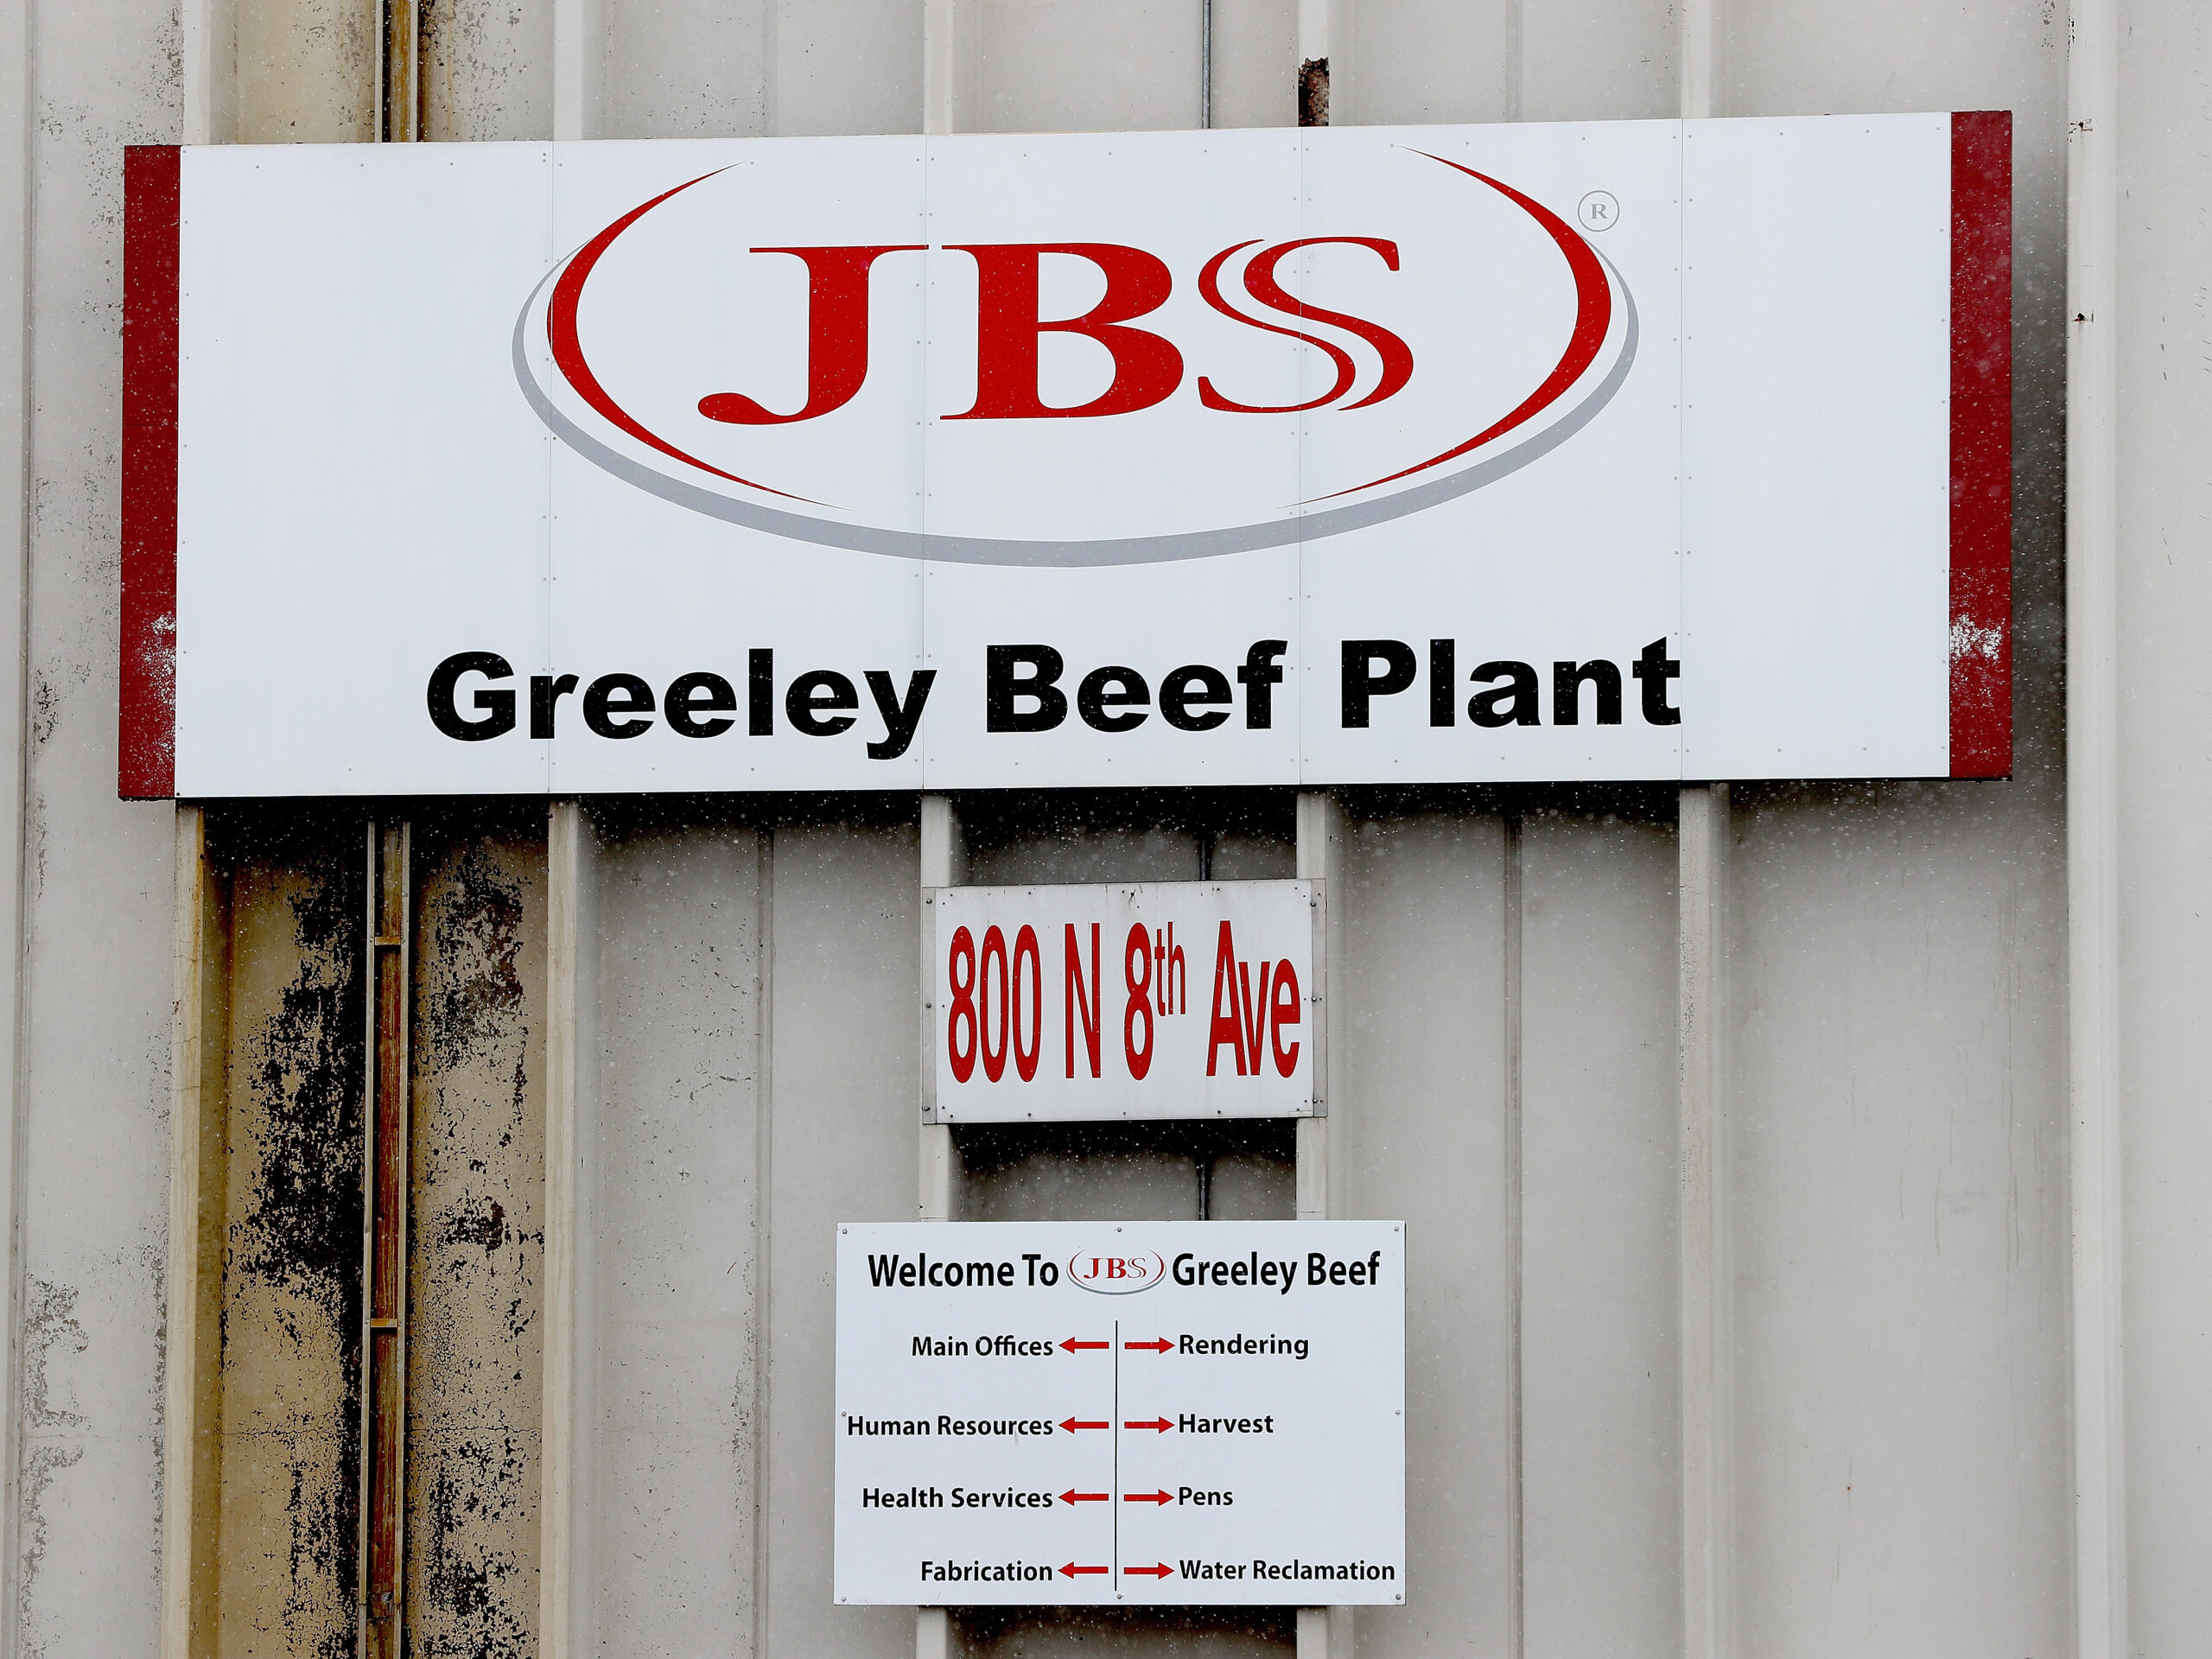 New York sues beef producer JBS for ‘fraudulent’ marketing around climate change